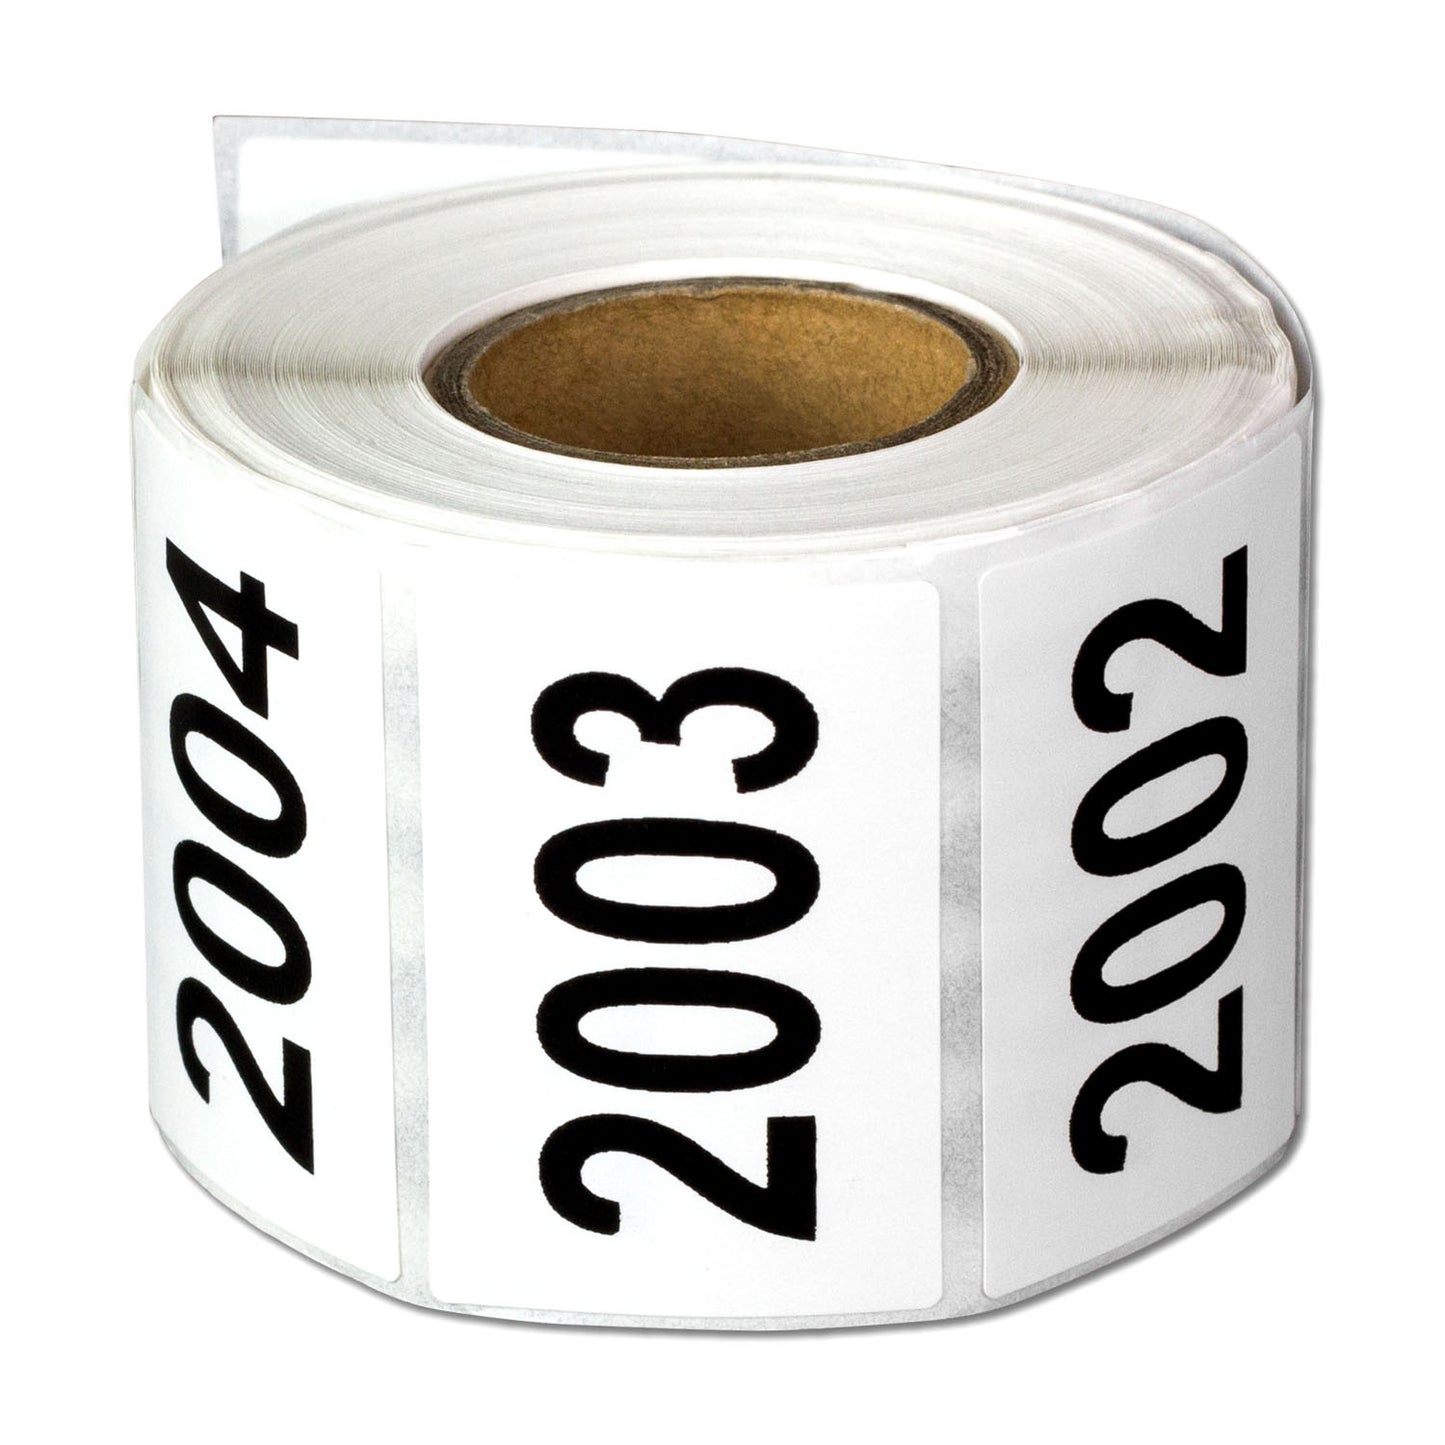 1.5 x 1 inch | Consecutive Numbers "2001 to 2500" Stickers